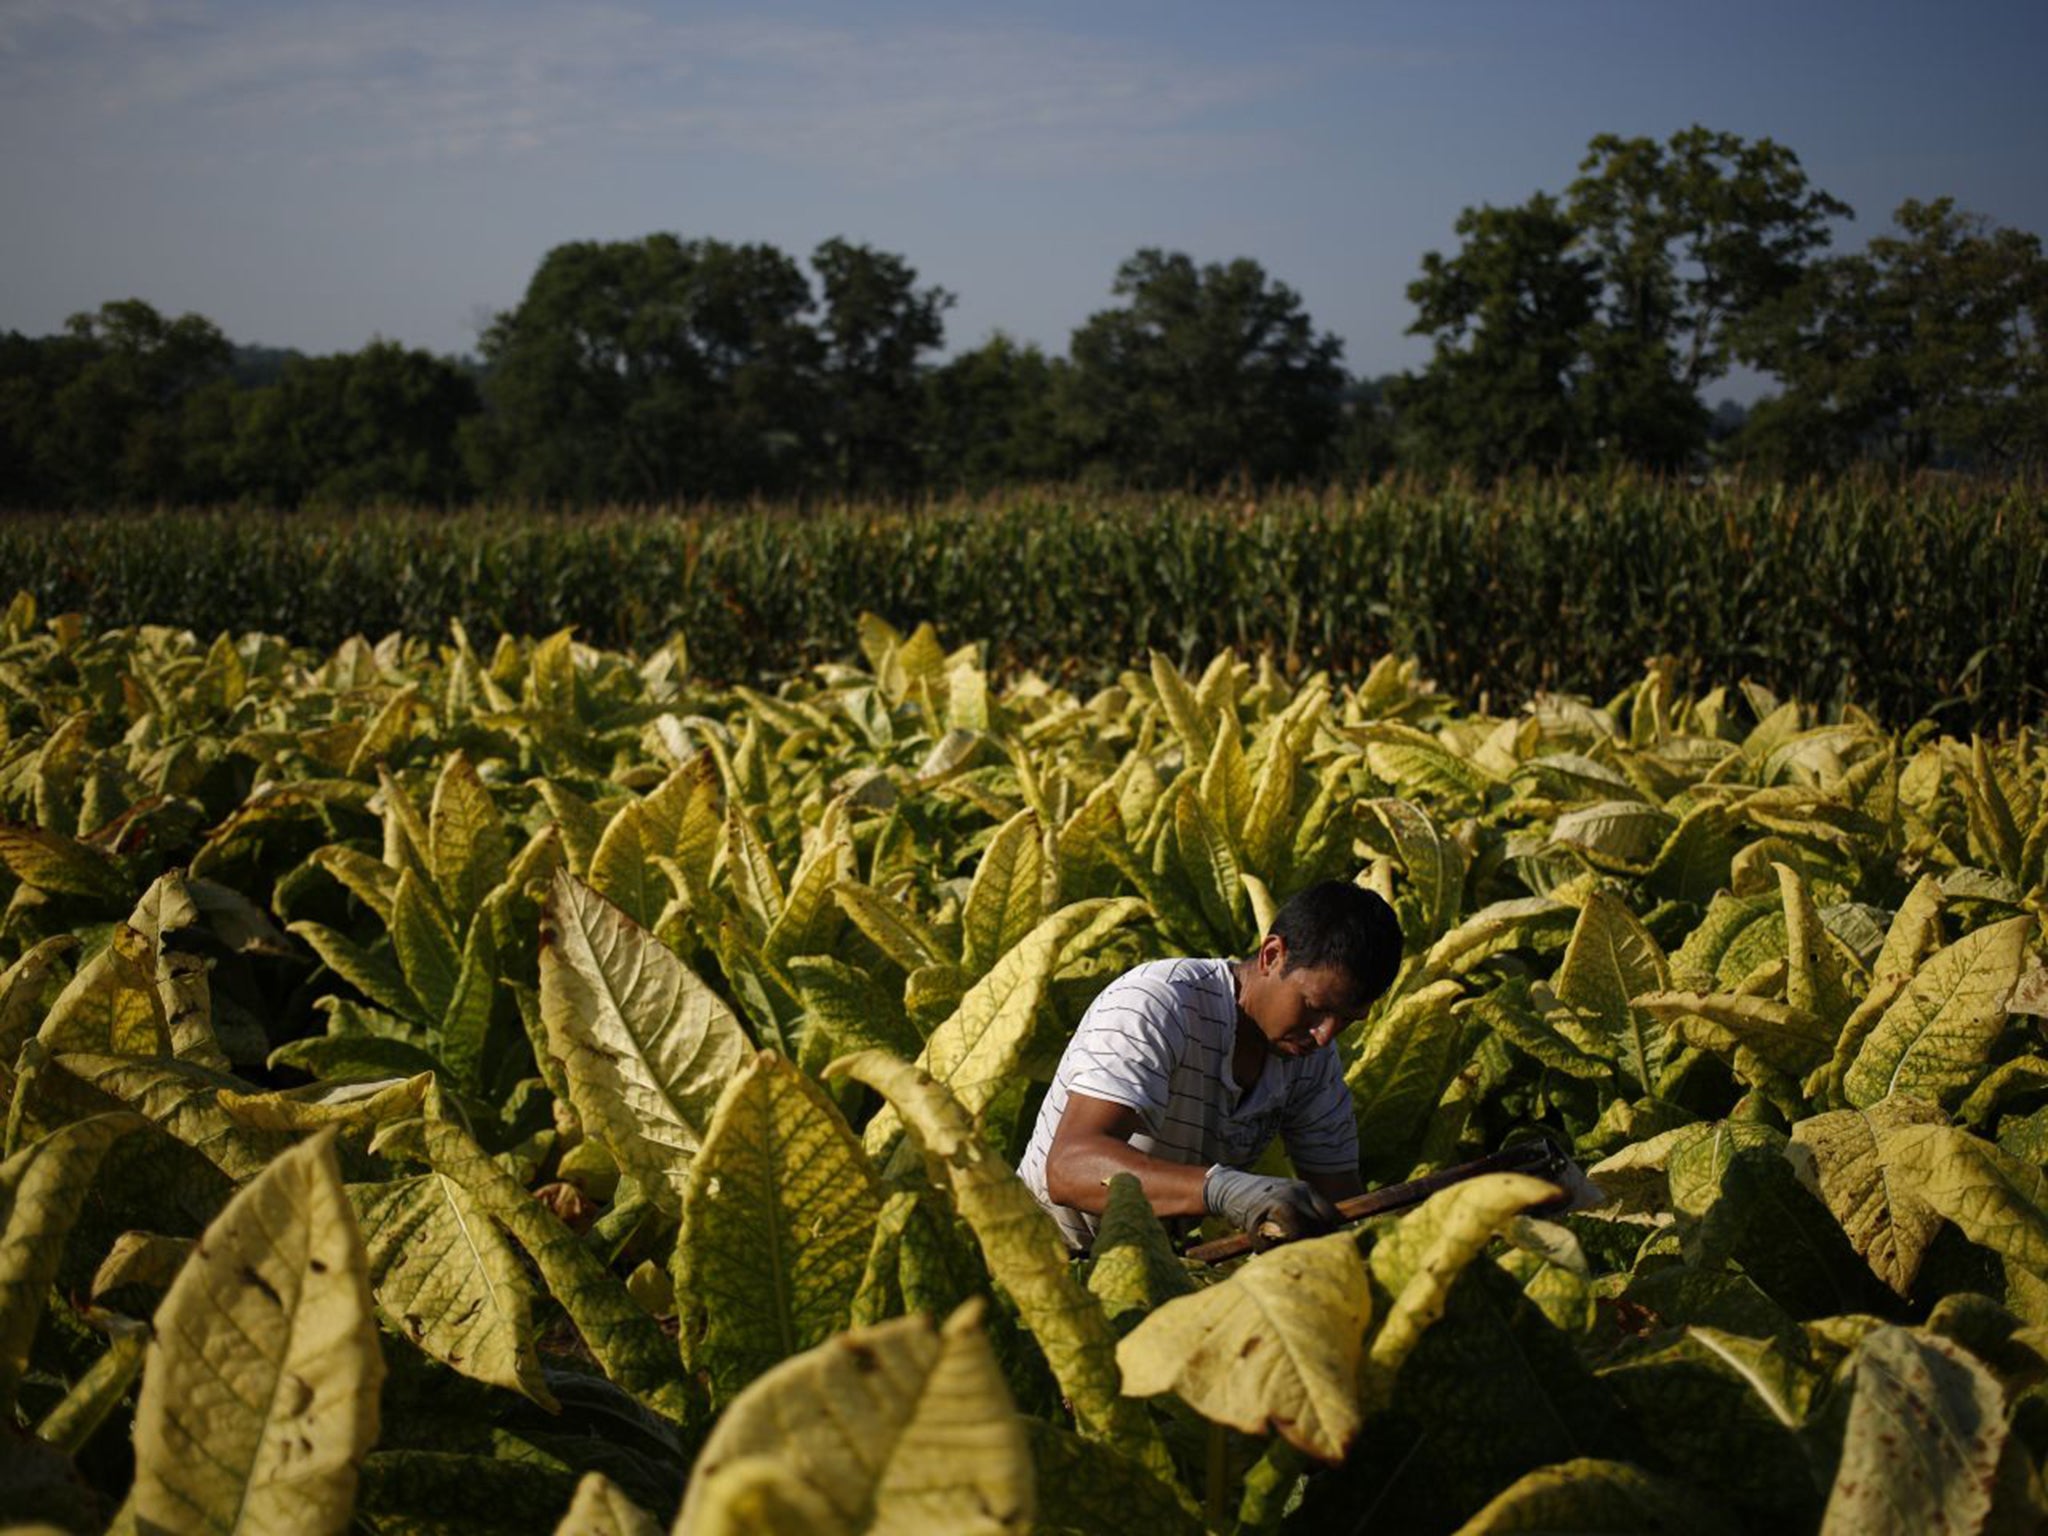 Officials have allegedly been paid to disrupt rival tobacco producers